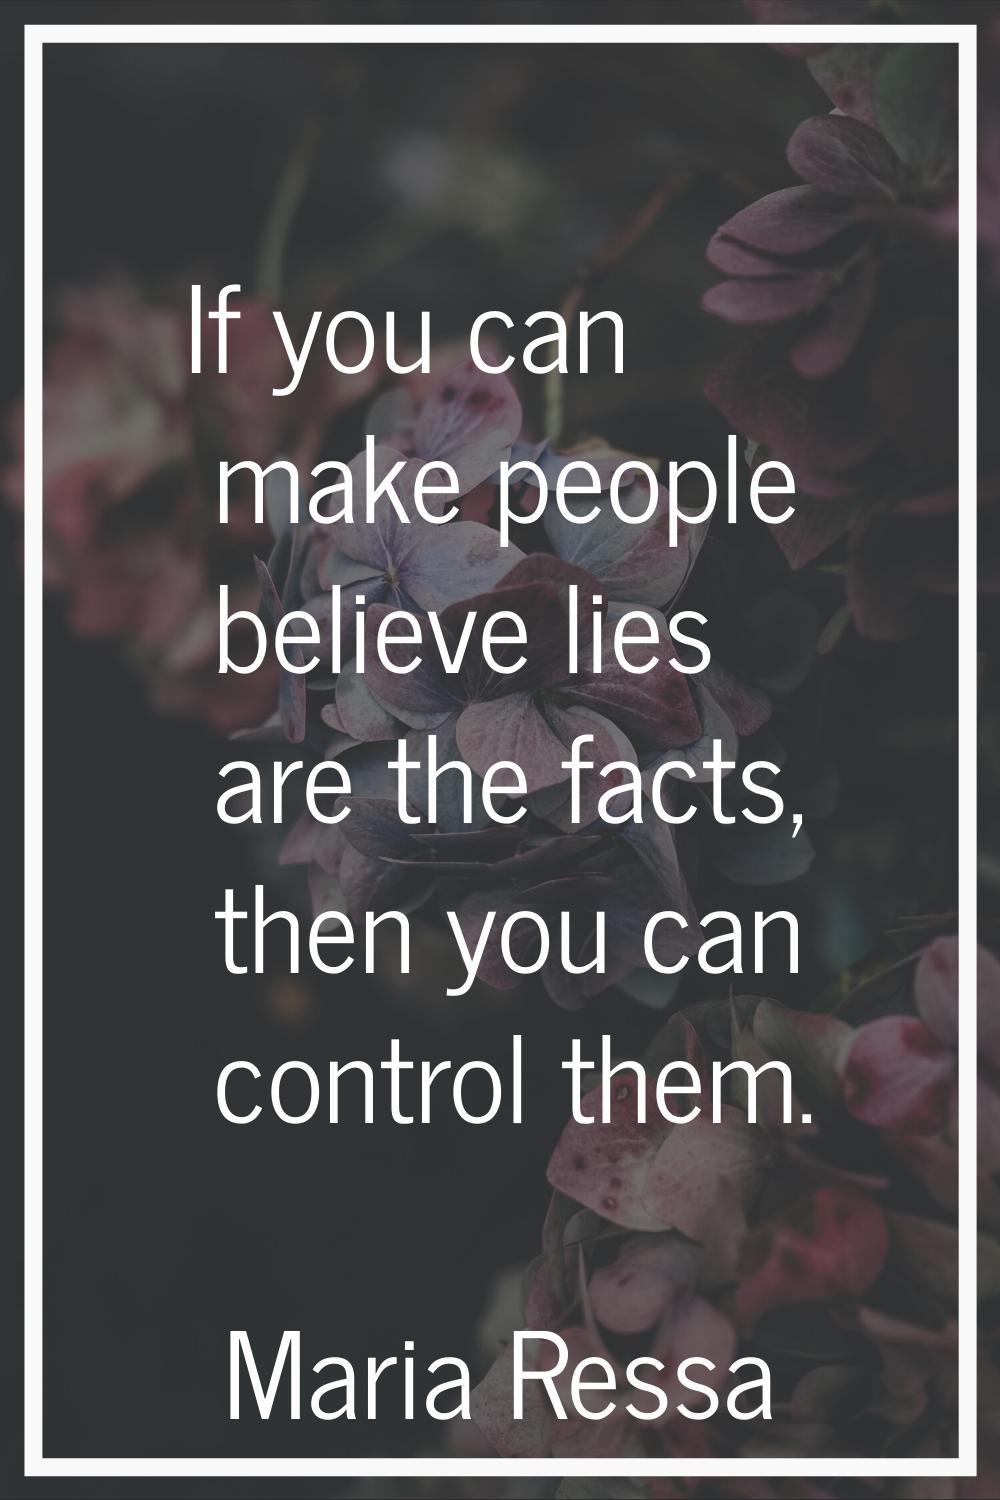 If you can make people believe lies are the facts, then you can control them.